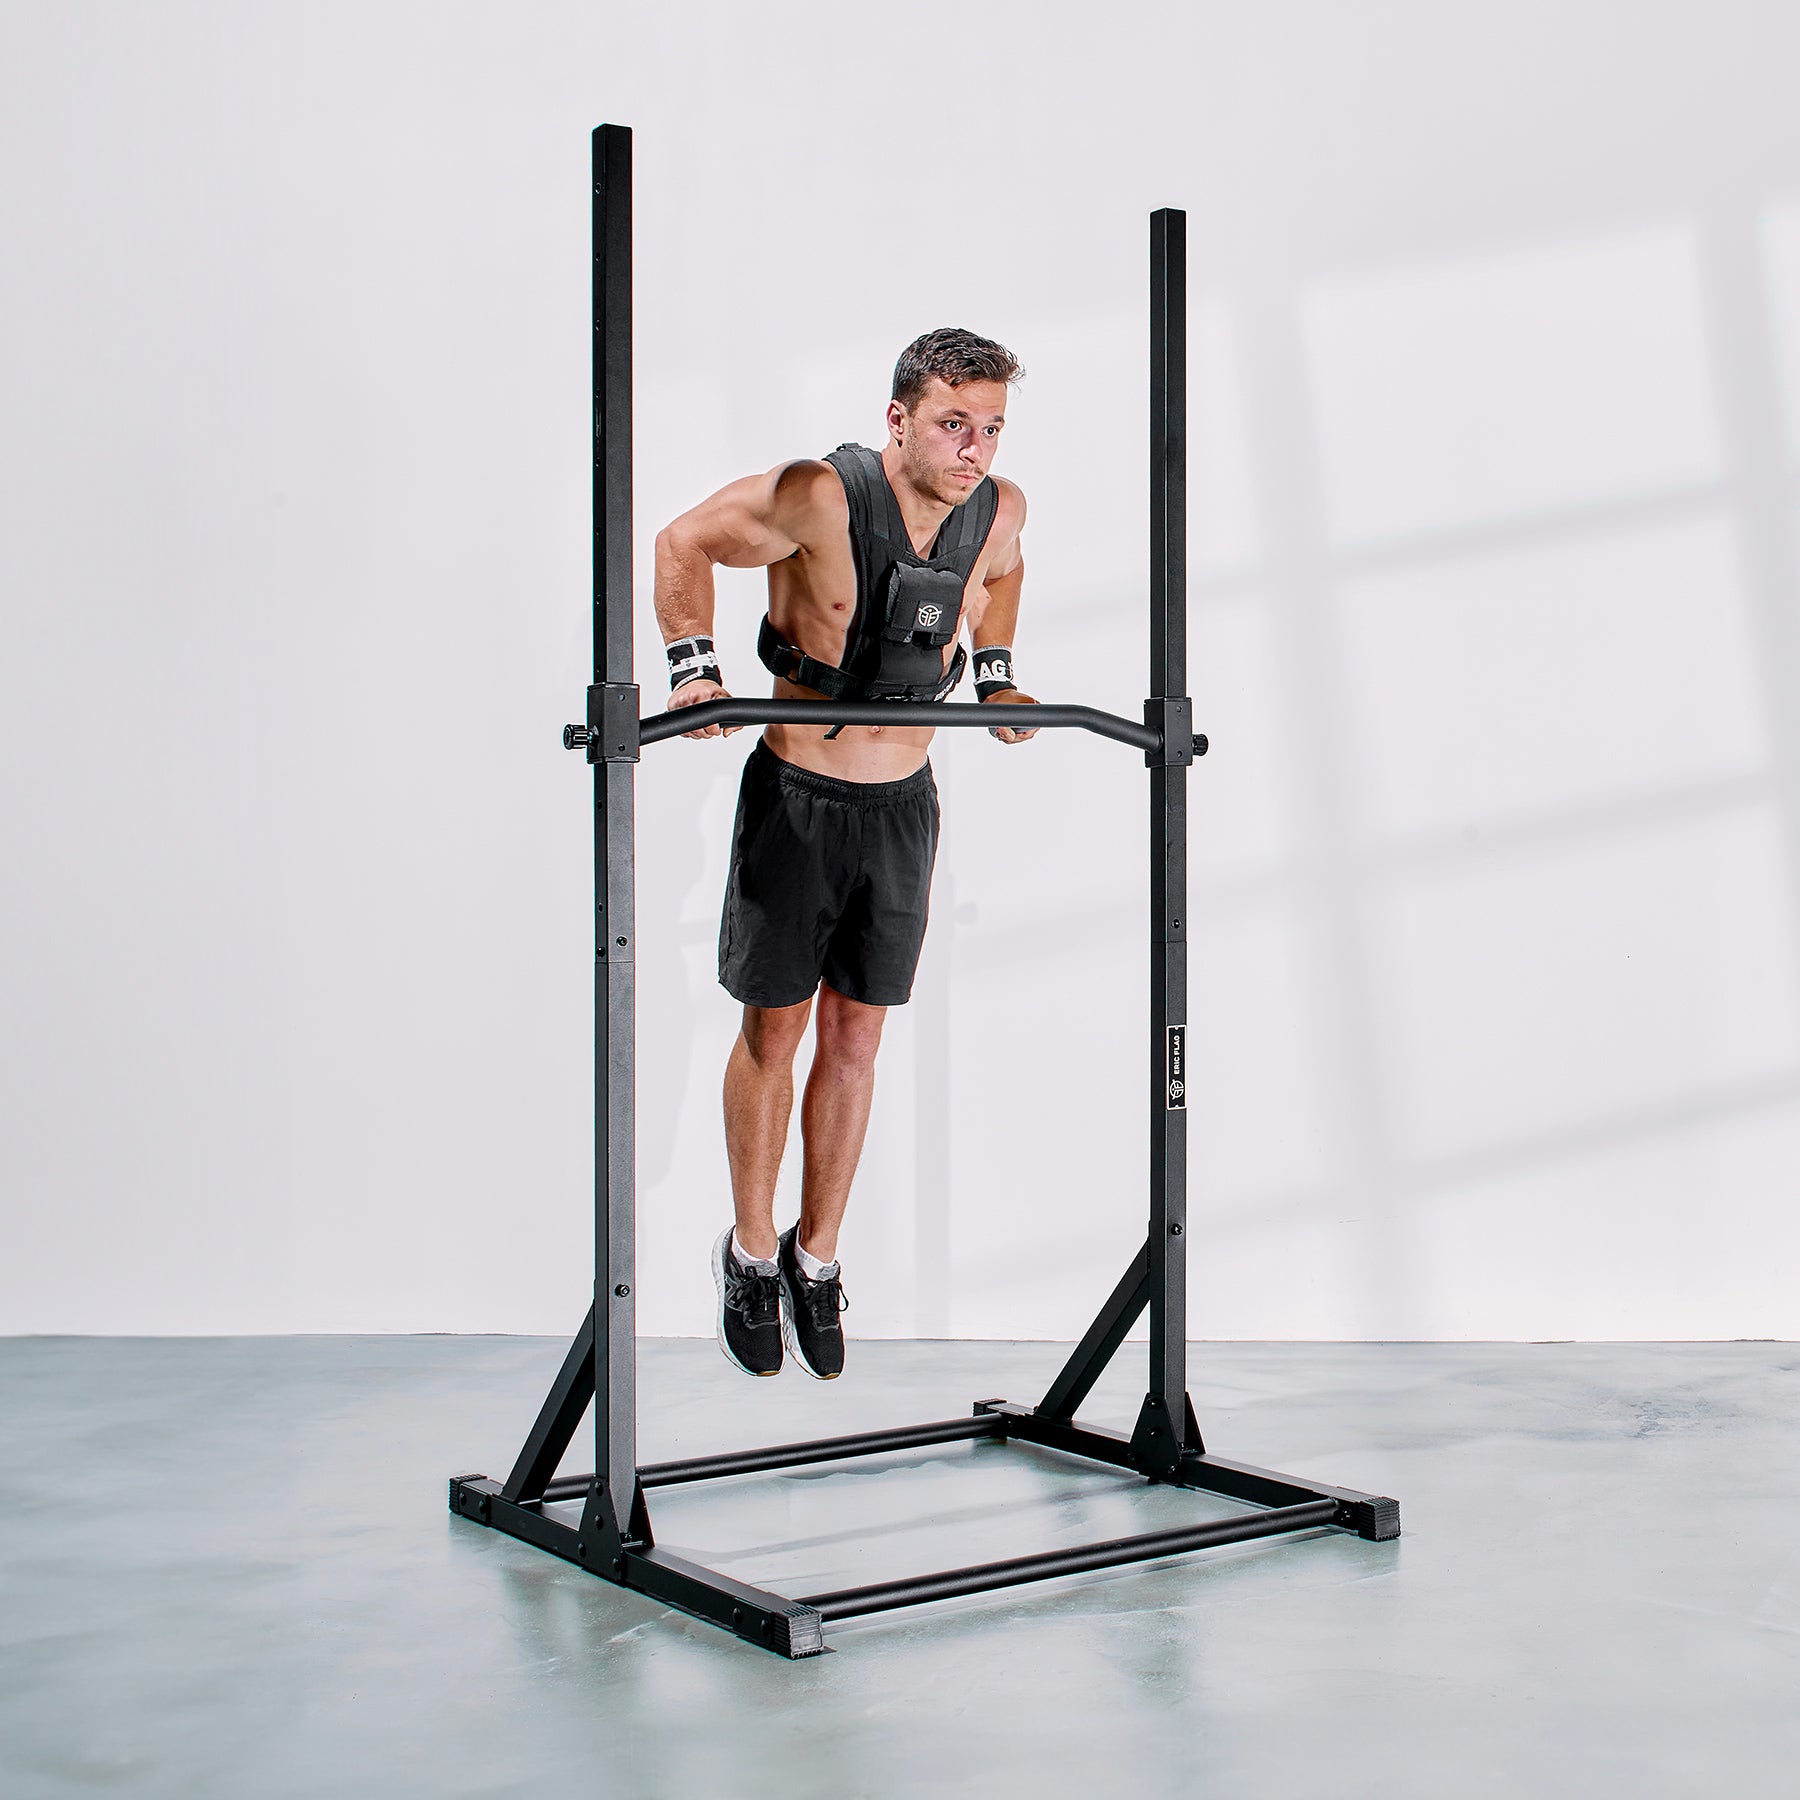 weighted dips on pull-up bar eric flag